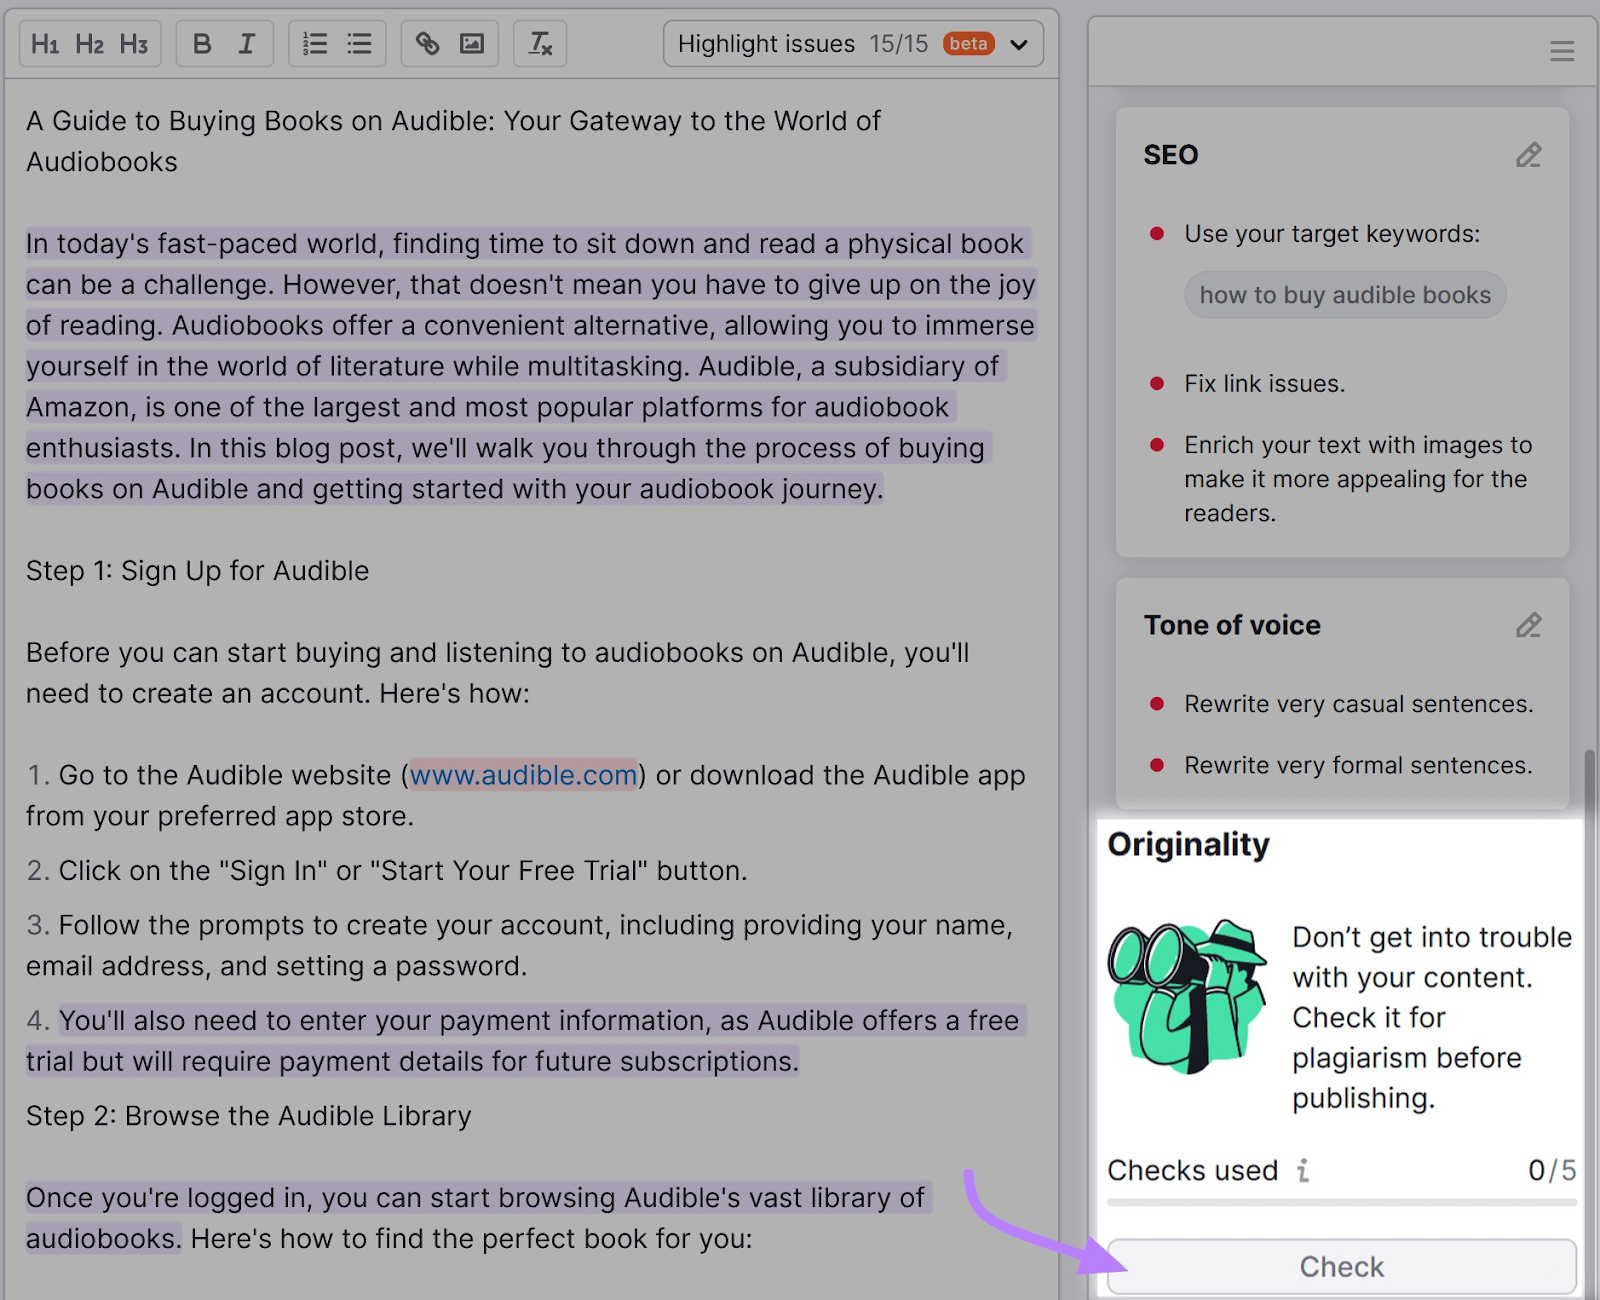 SEO Writing Assistant’s text box with Originality section highlighted on the left side menu